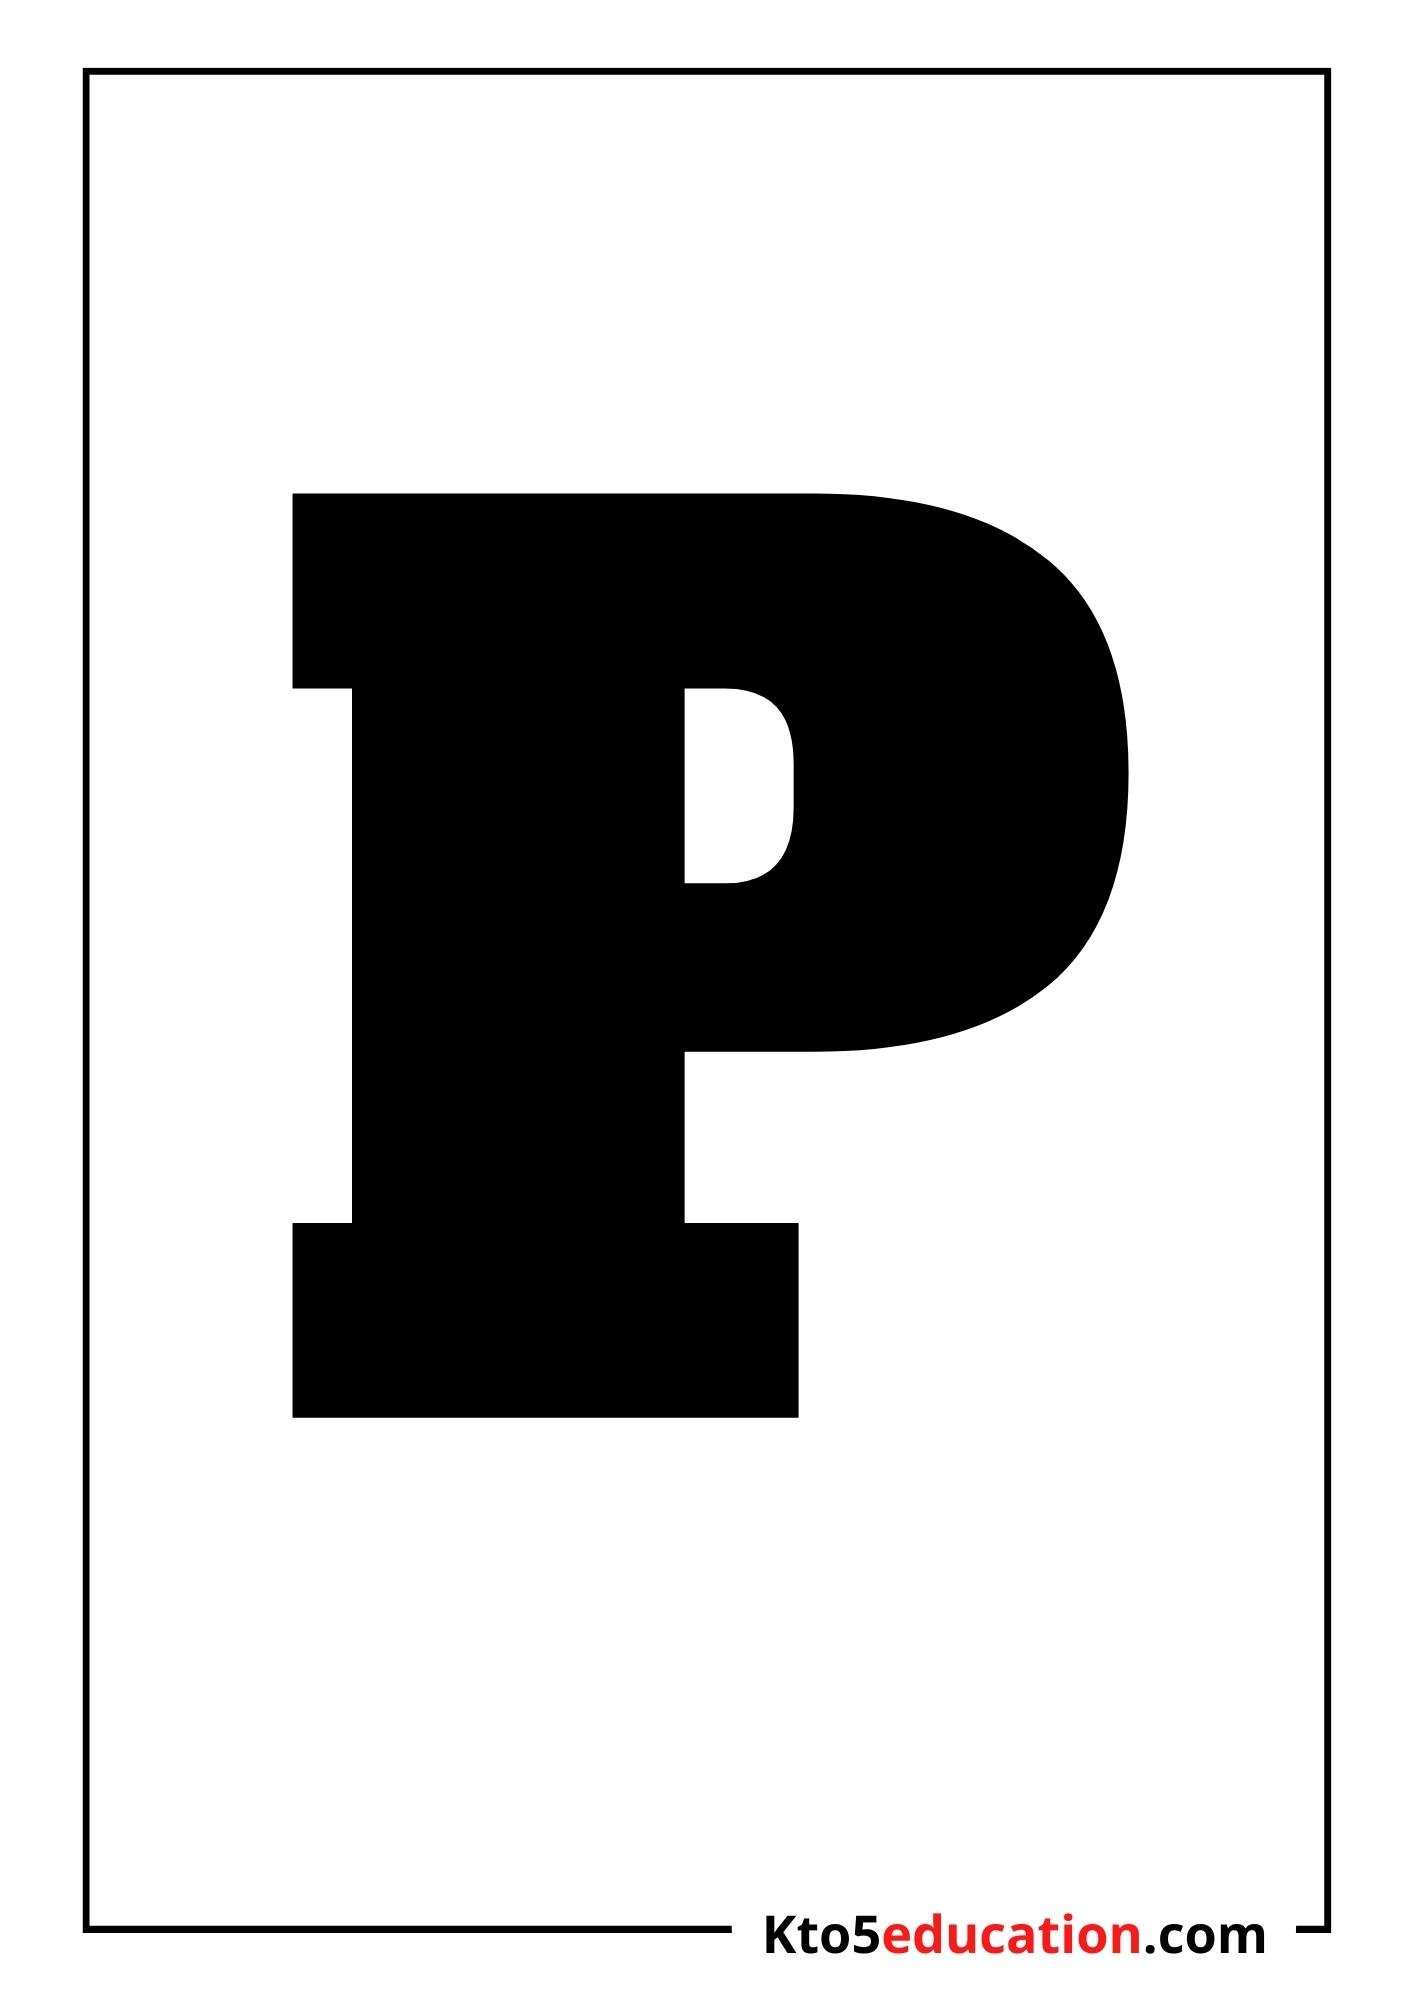 Free Printable Letter P Silhouette